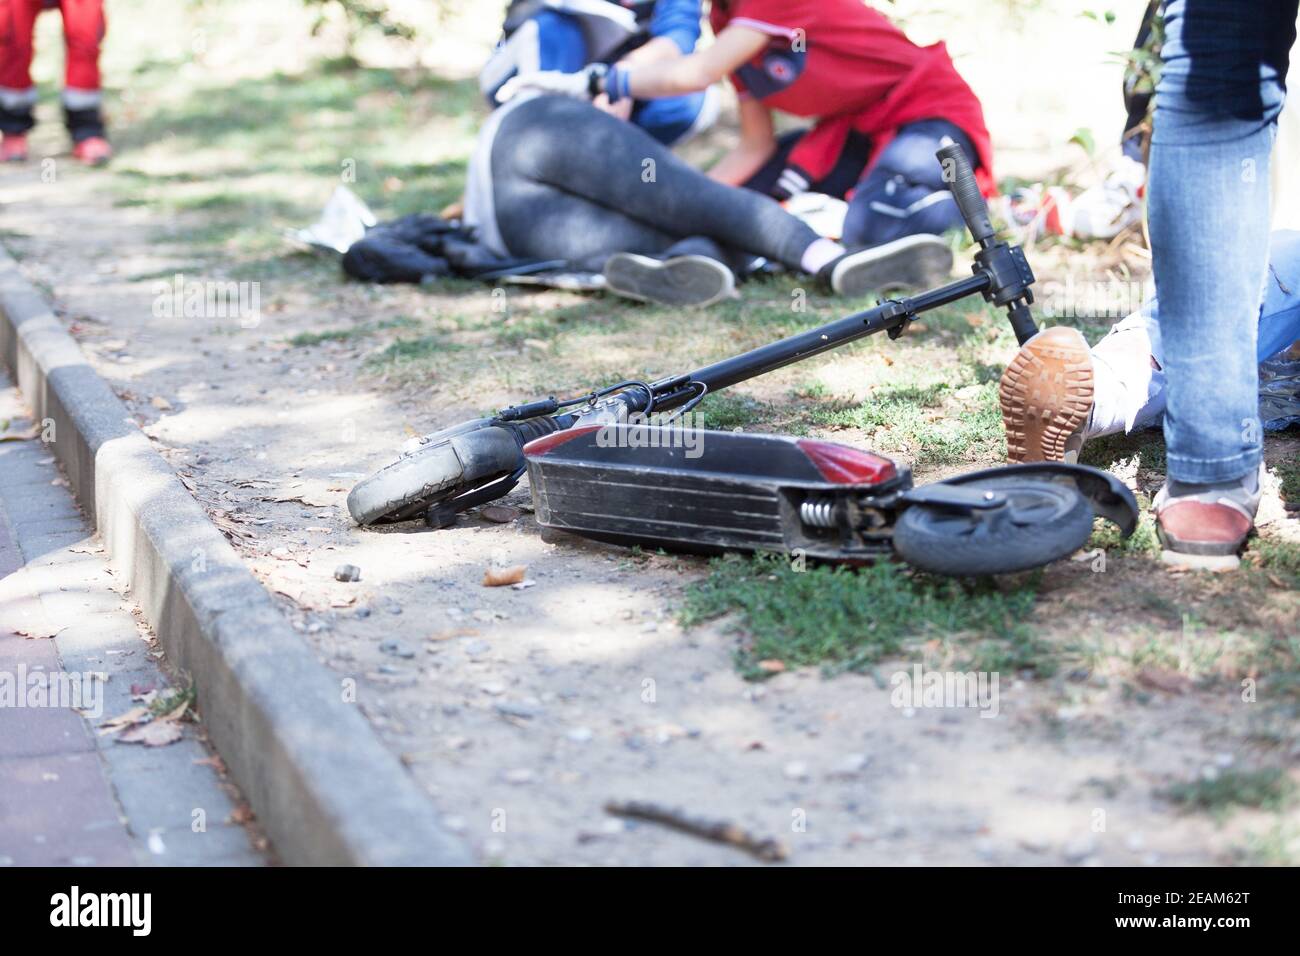 First aid for electric scooter rider injured in an accident Stock Photo